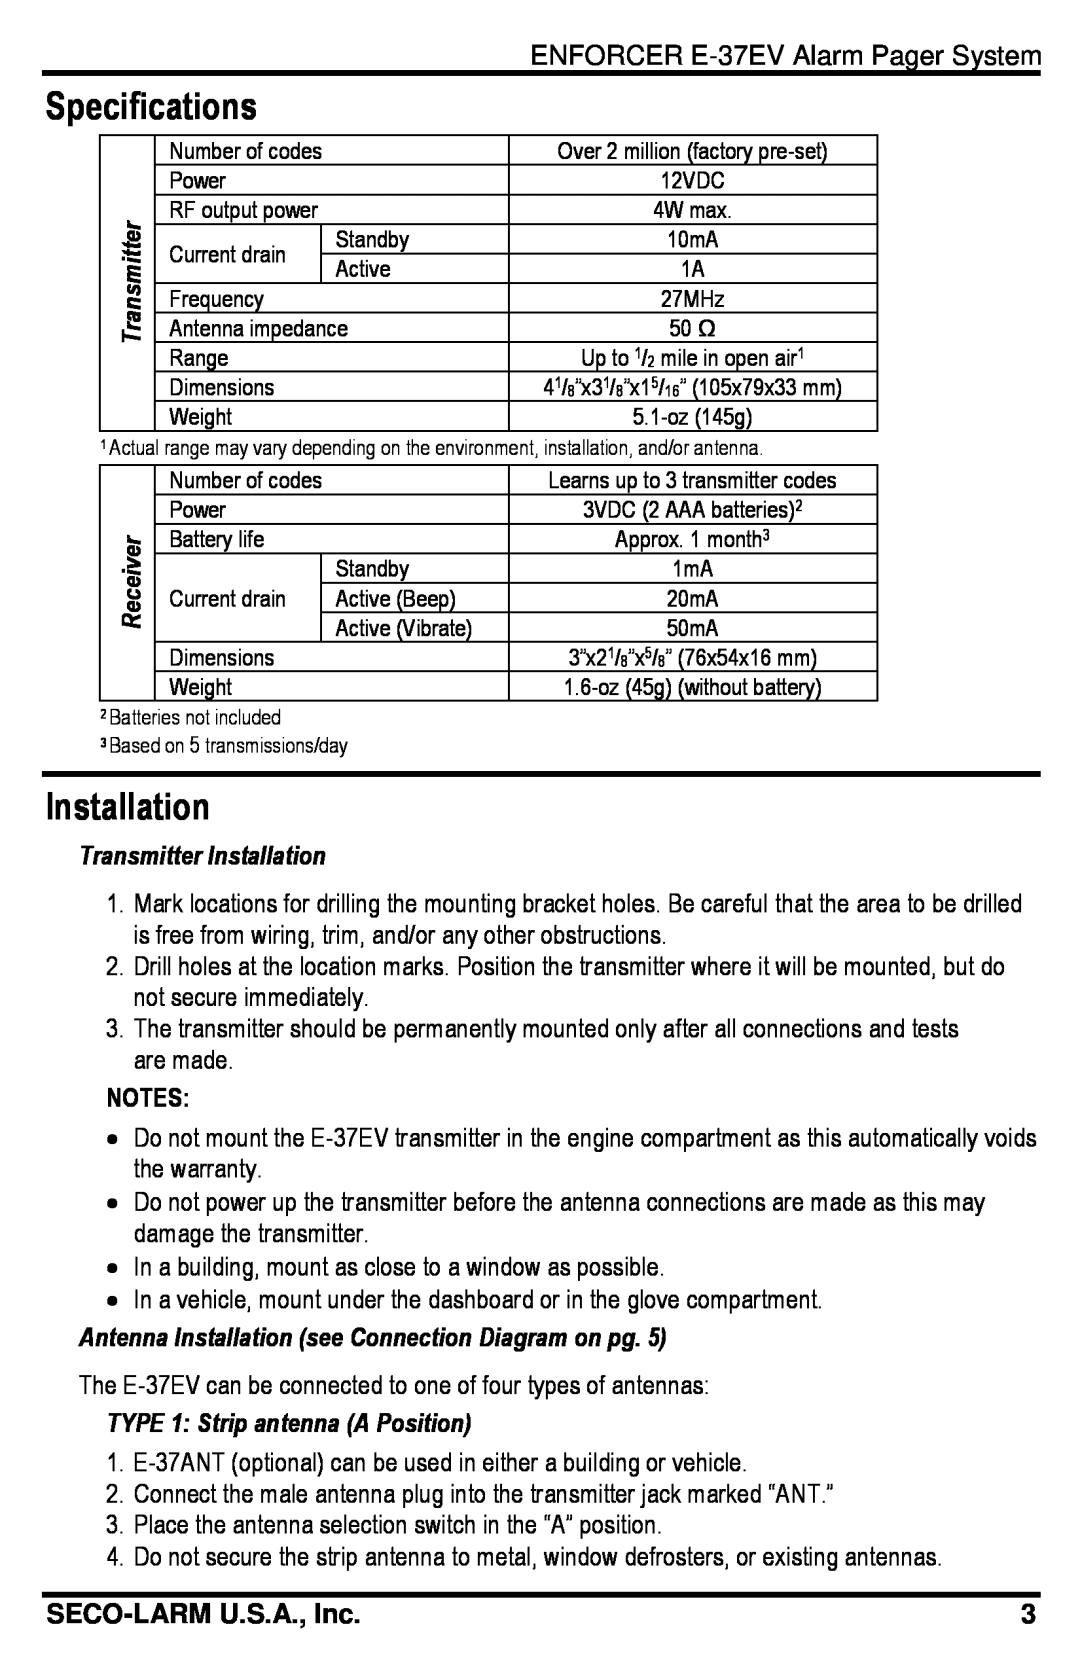 SECO-LARM USA E-37EV manual Specifications, Transmitter Installation, Notes, TYPE 1 Strip antenna A Position 